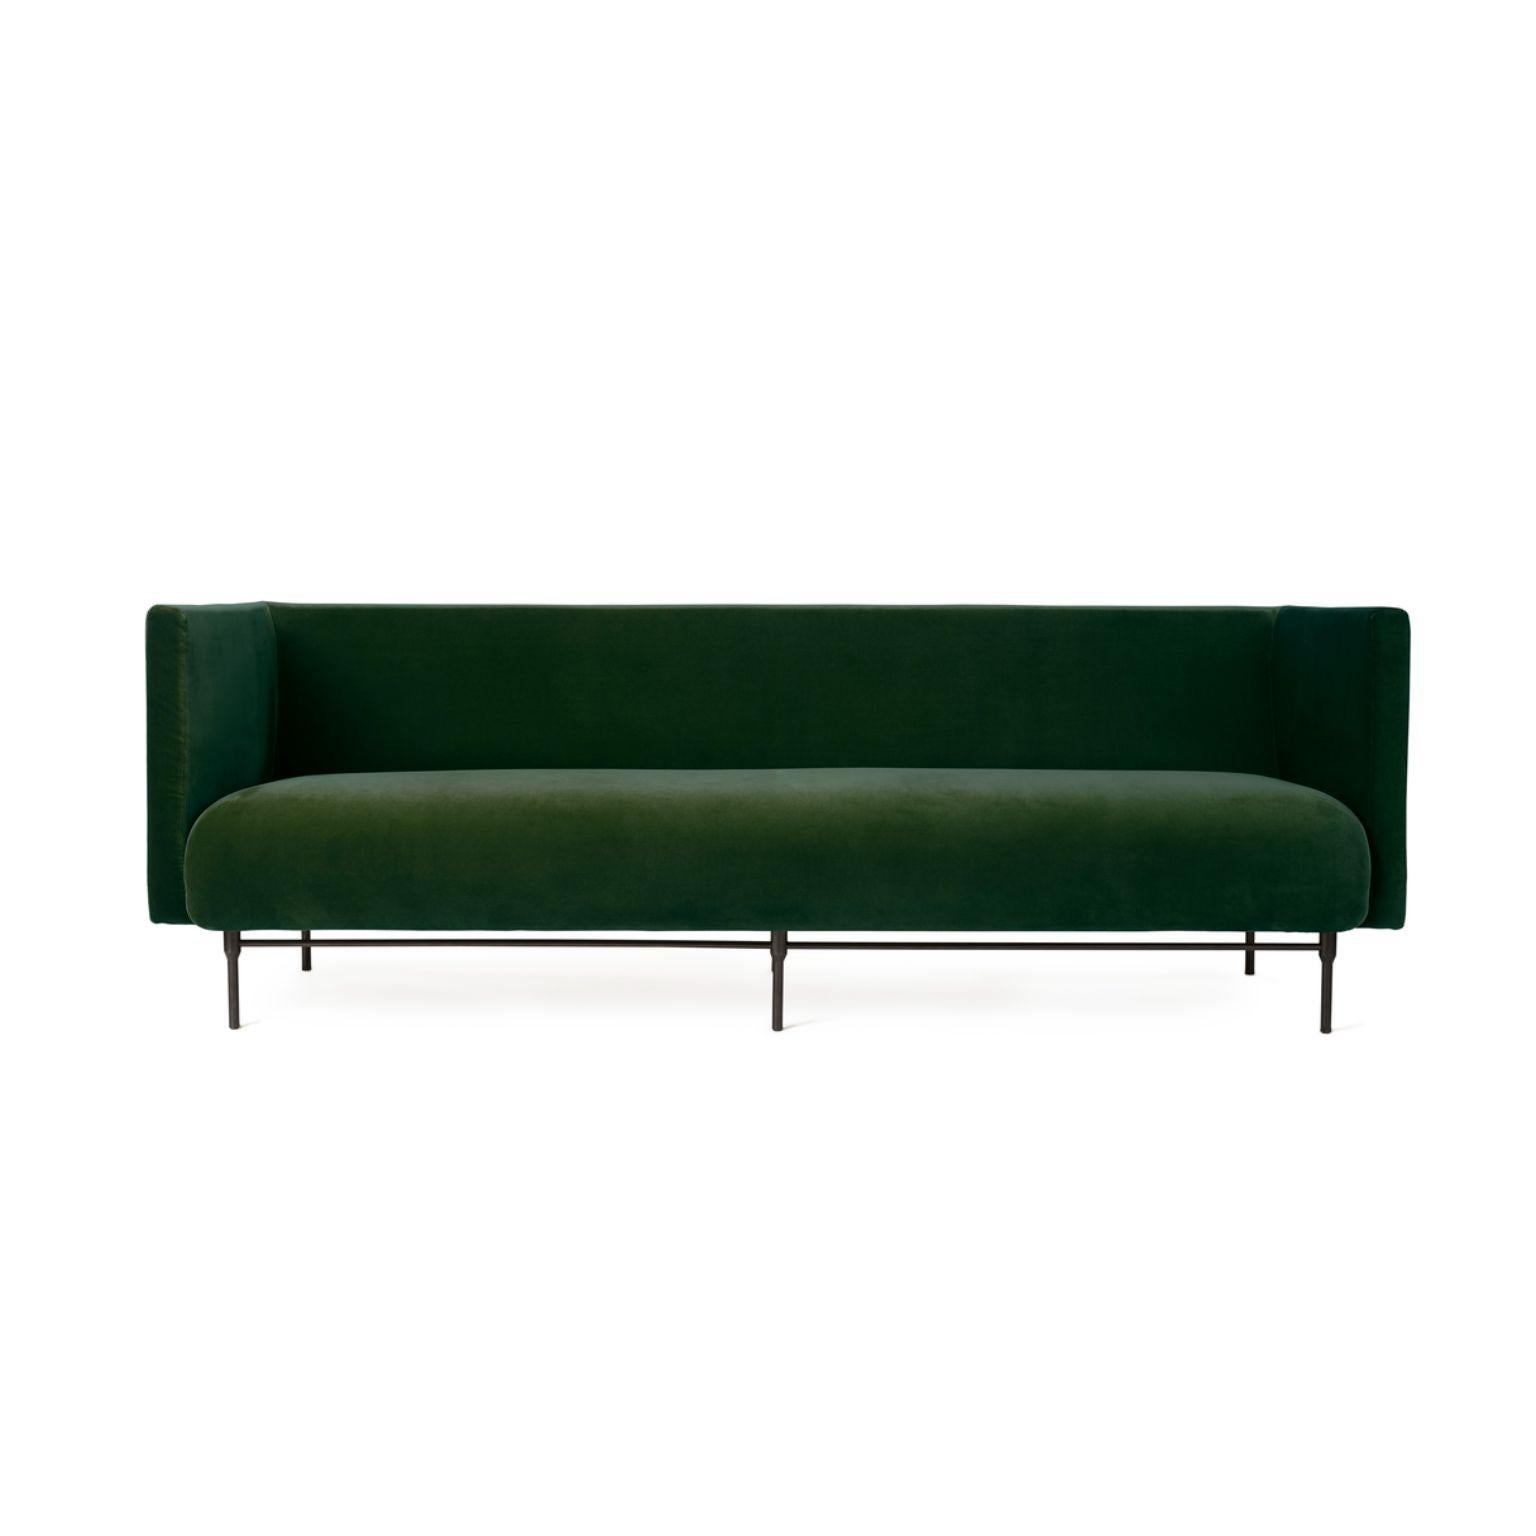 Galore 3 Seater Forest green by Warm Nordic
Dimensions: D222 x W83 x H 76 cm
Material: Textile upholstery, Powder coated black steel legs, Wooden frame, foam, spring system.
Weight: 62 kg
Also available in different colours and finishes.